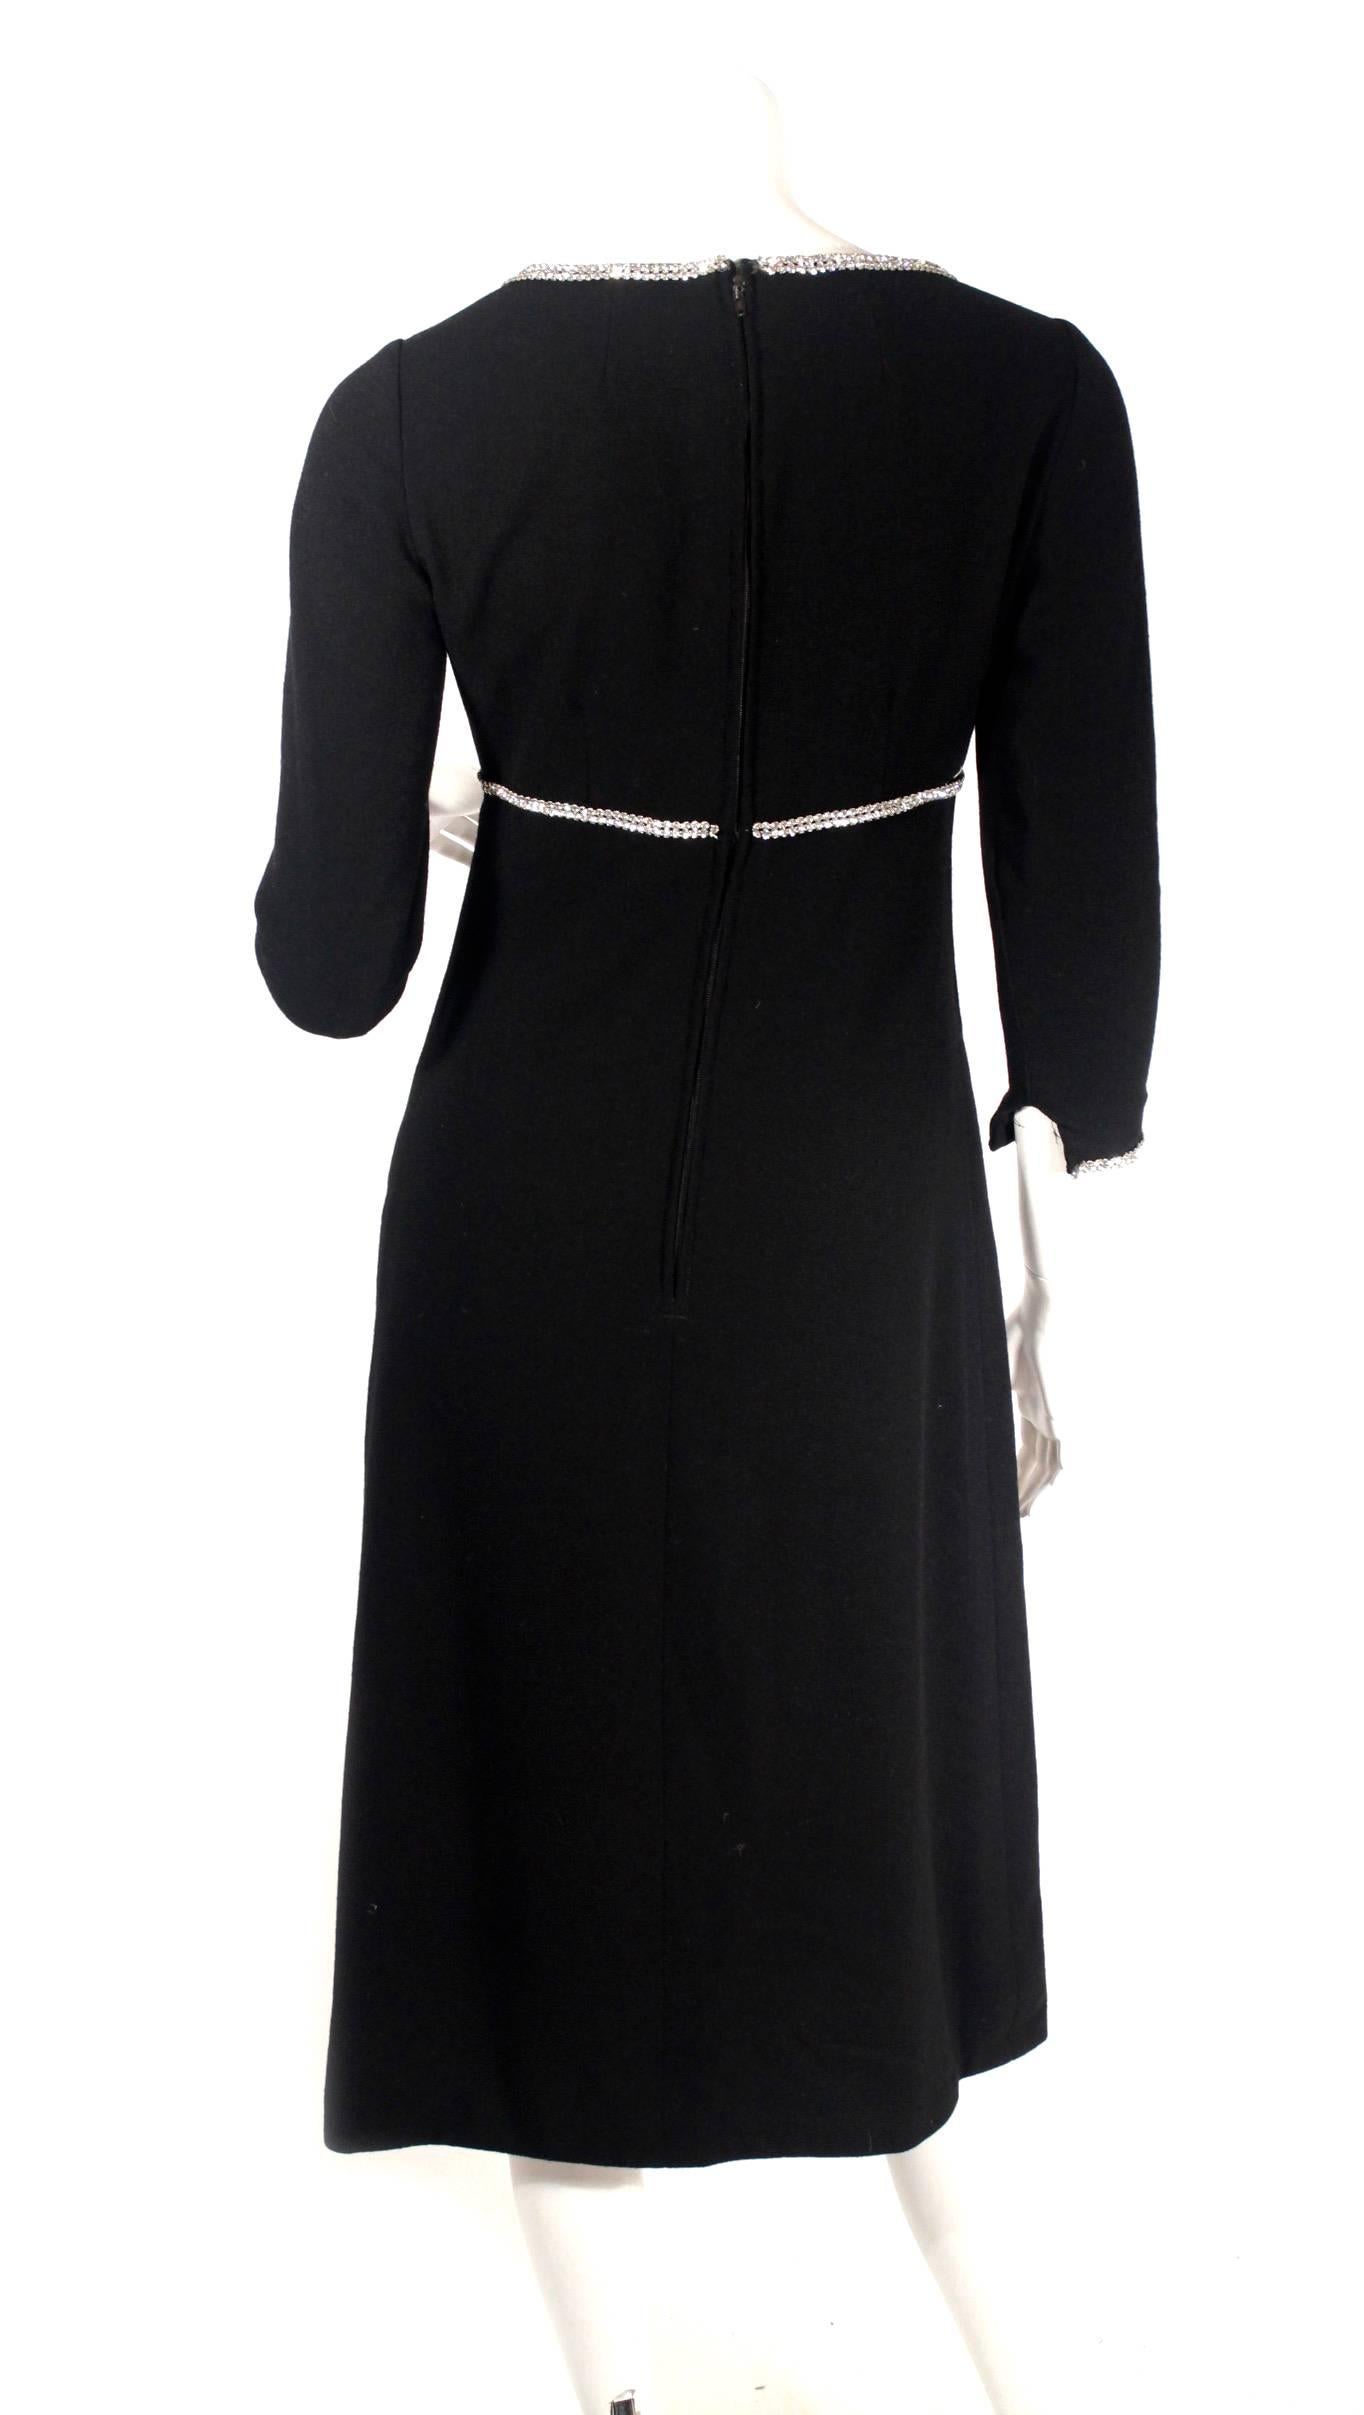 Women's Norman Norell Black Crepe Dress with Rhinestones For Sale